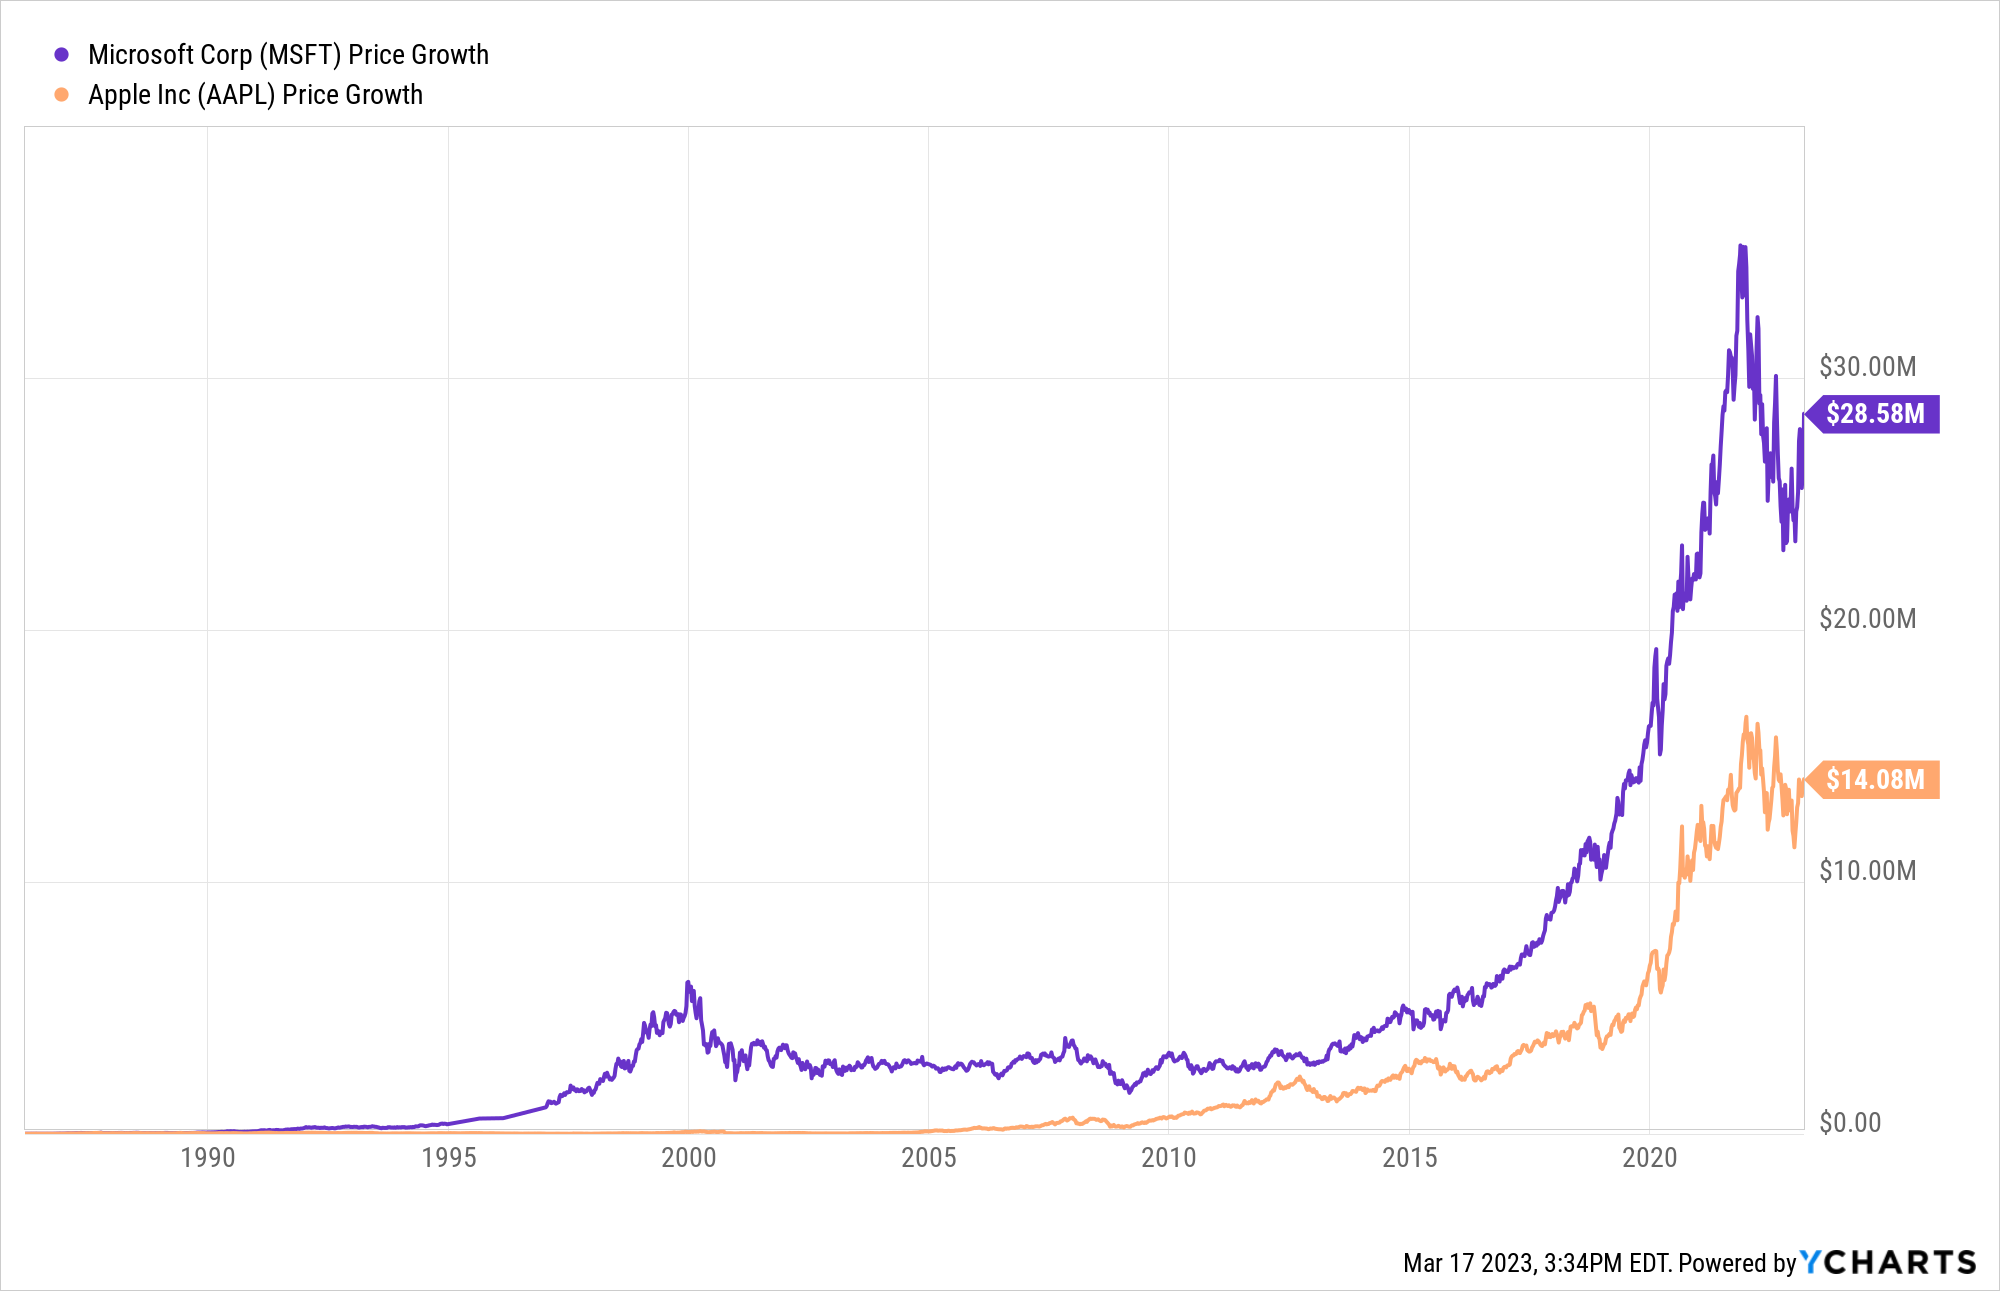 A graph showing the price growth in MSFT and AAPL stock over time